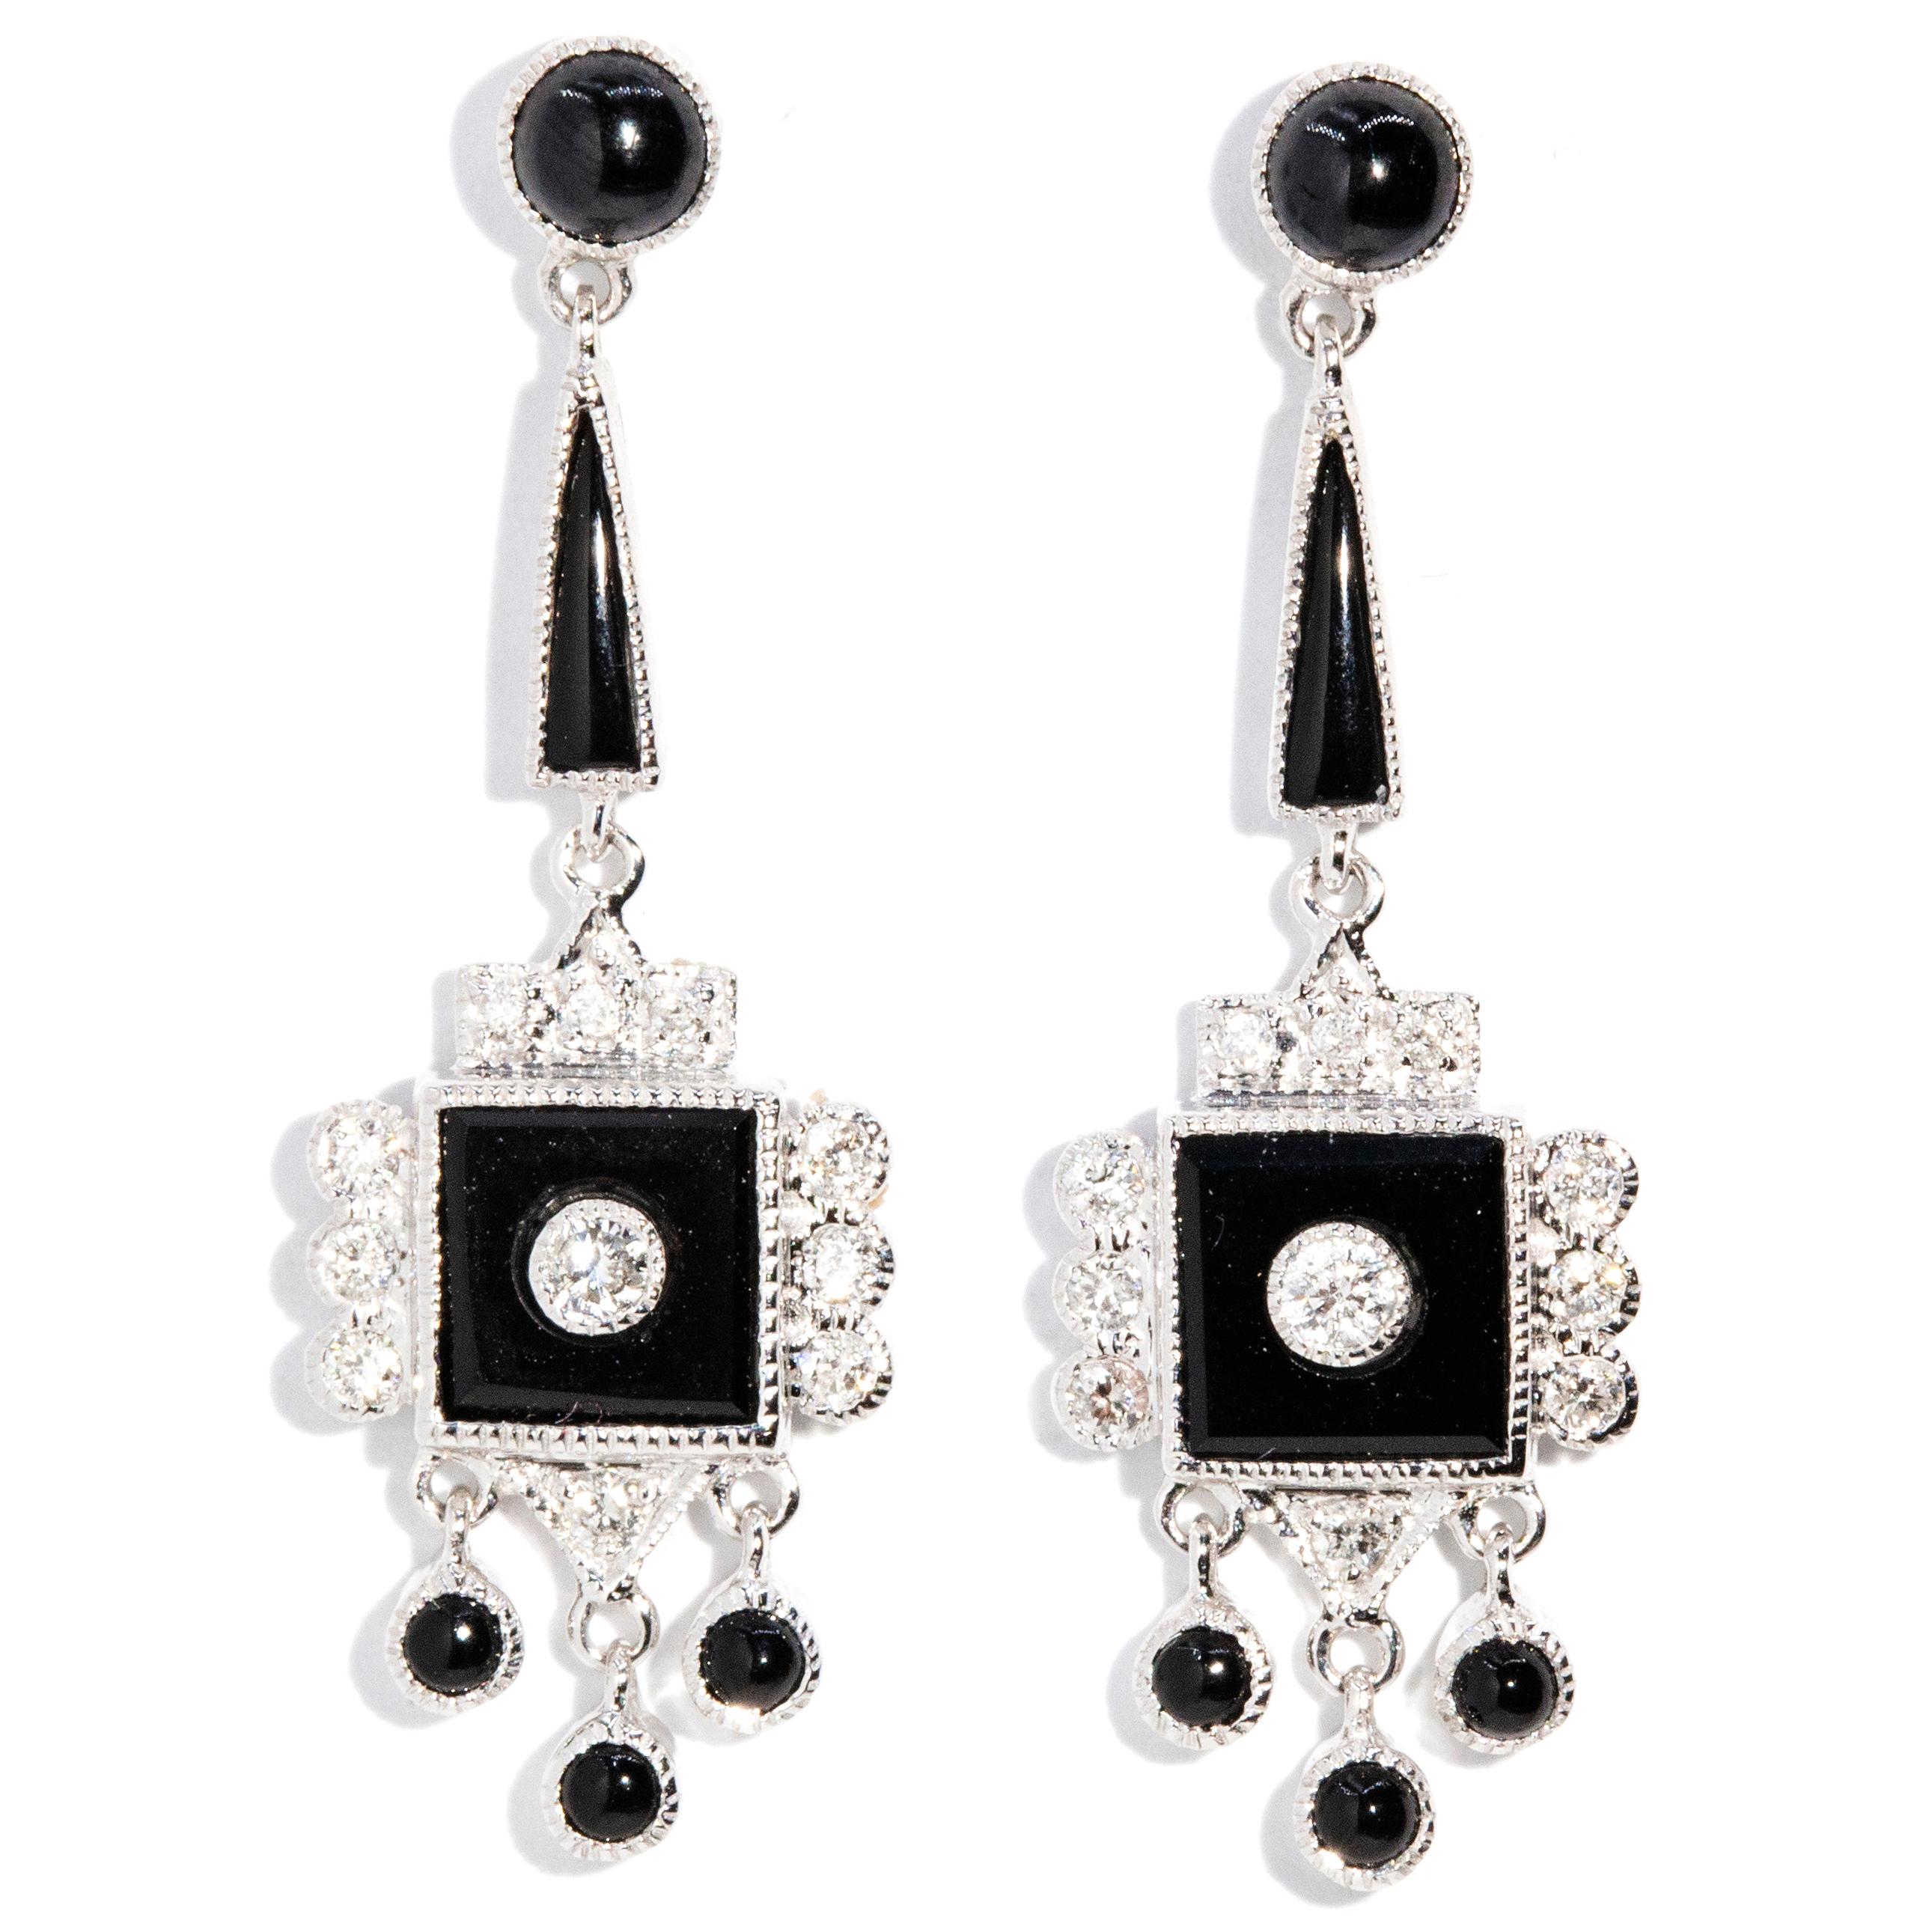 Contemporary Vintage Inspired Black Onyx Cabochon & Diamond Drop Style Earrings 9 Carat Gold